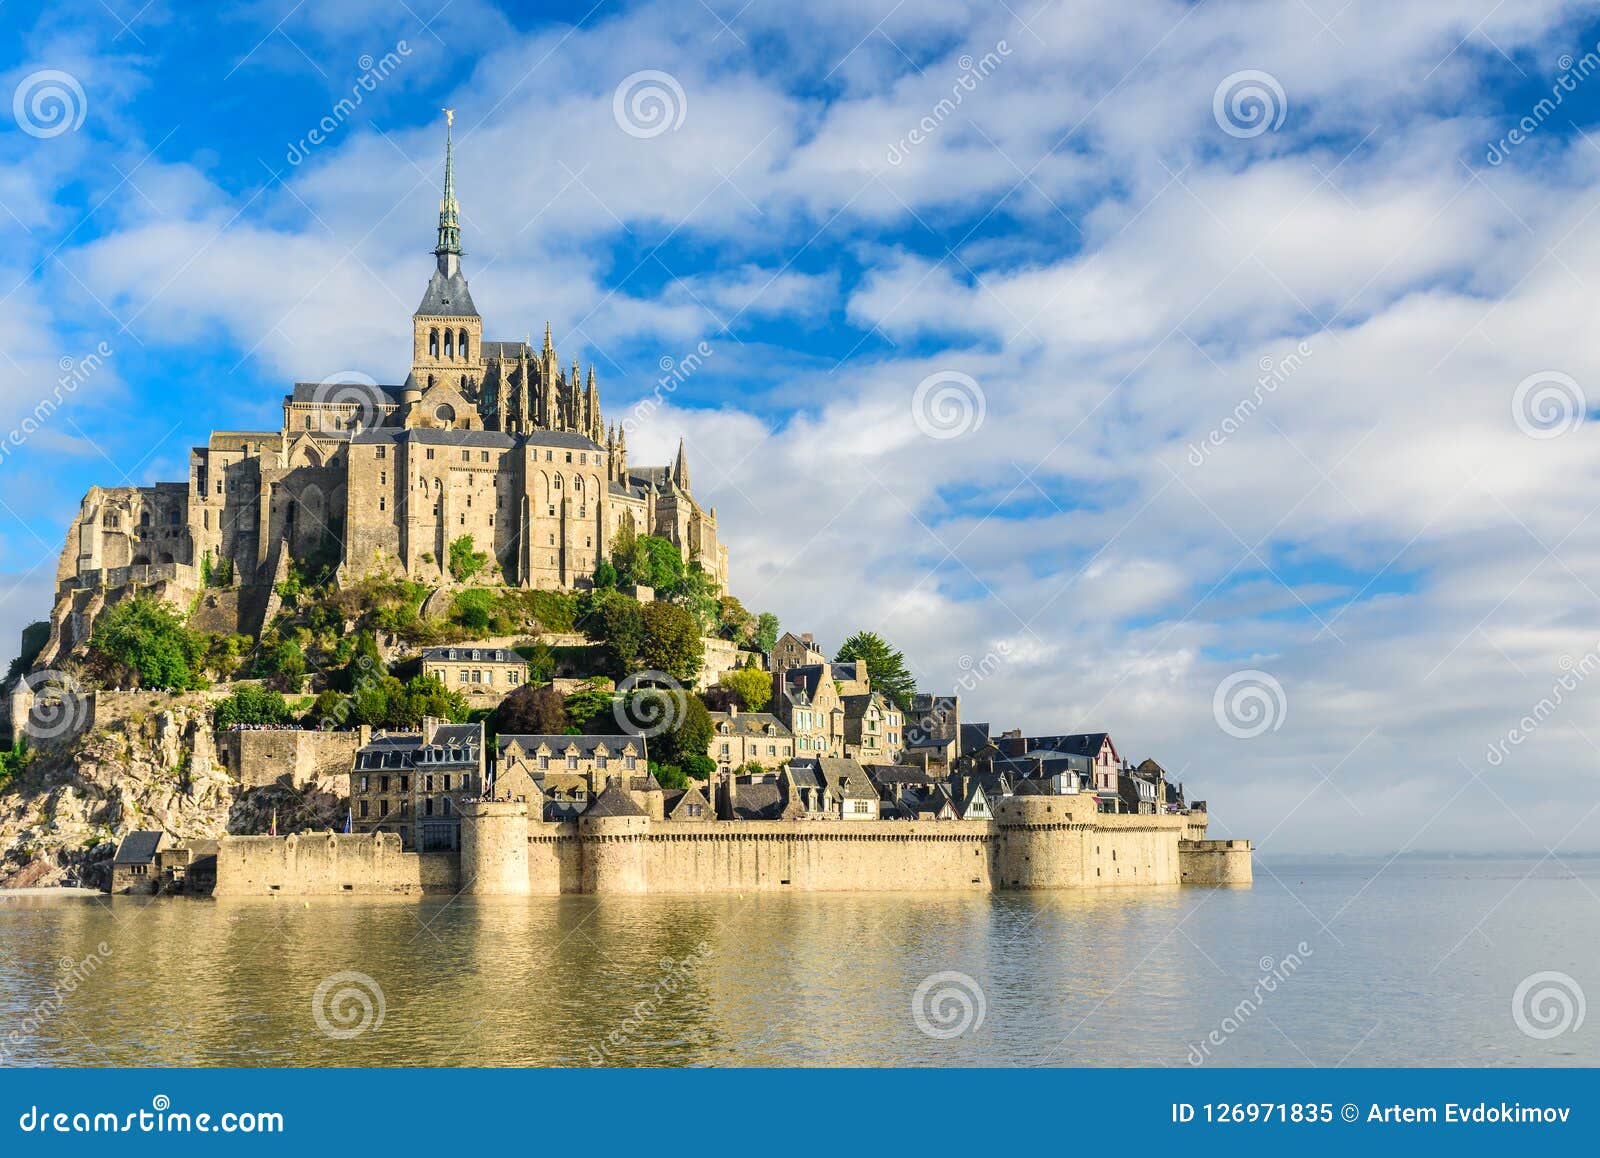 mont saint michel abbey on the island, normandy, northern france, europe